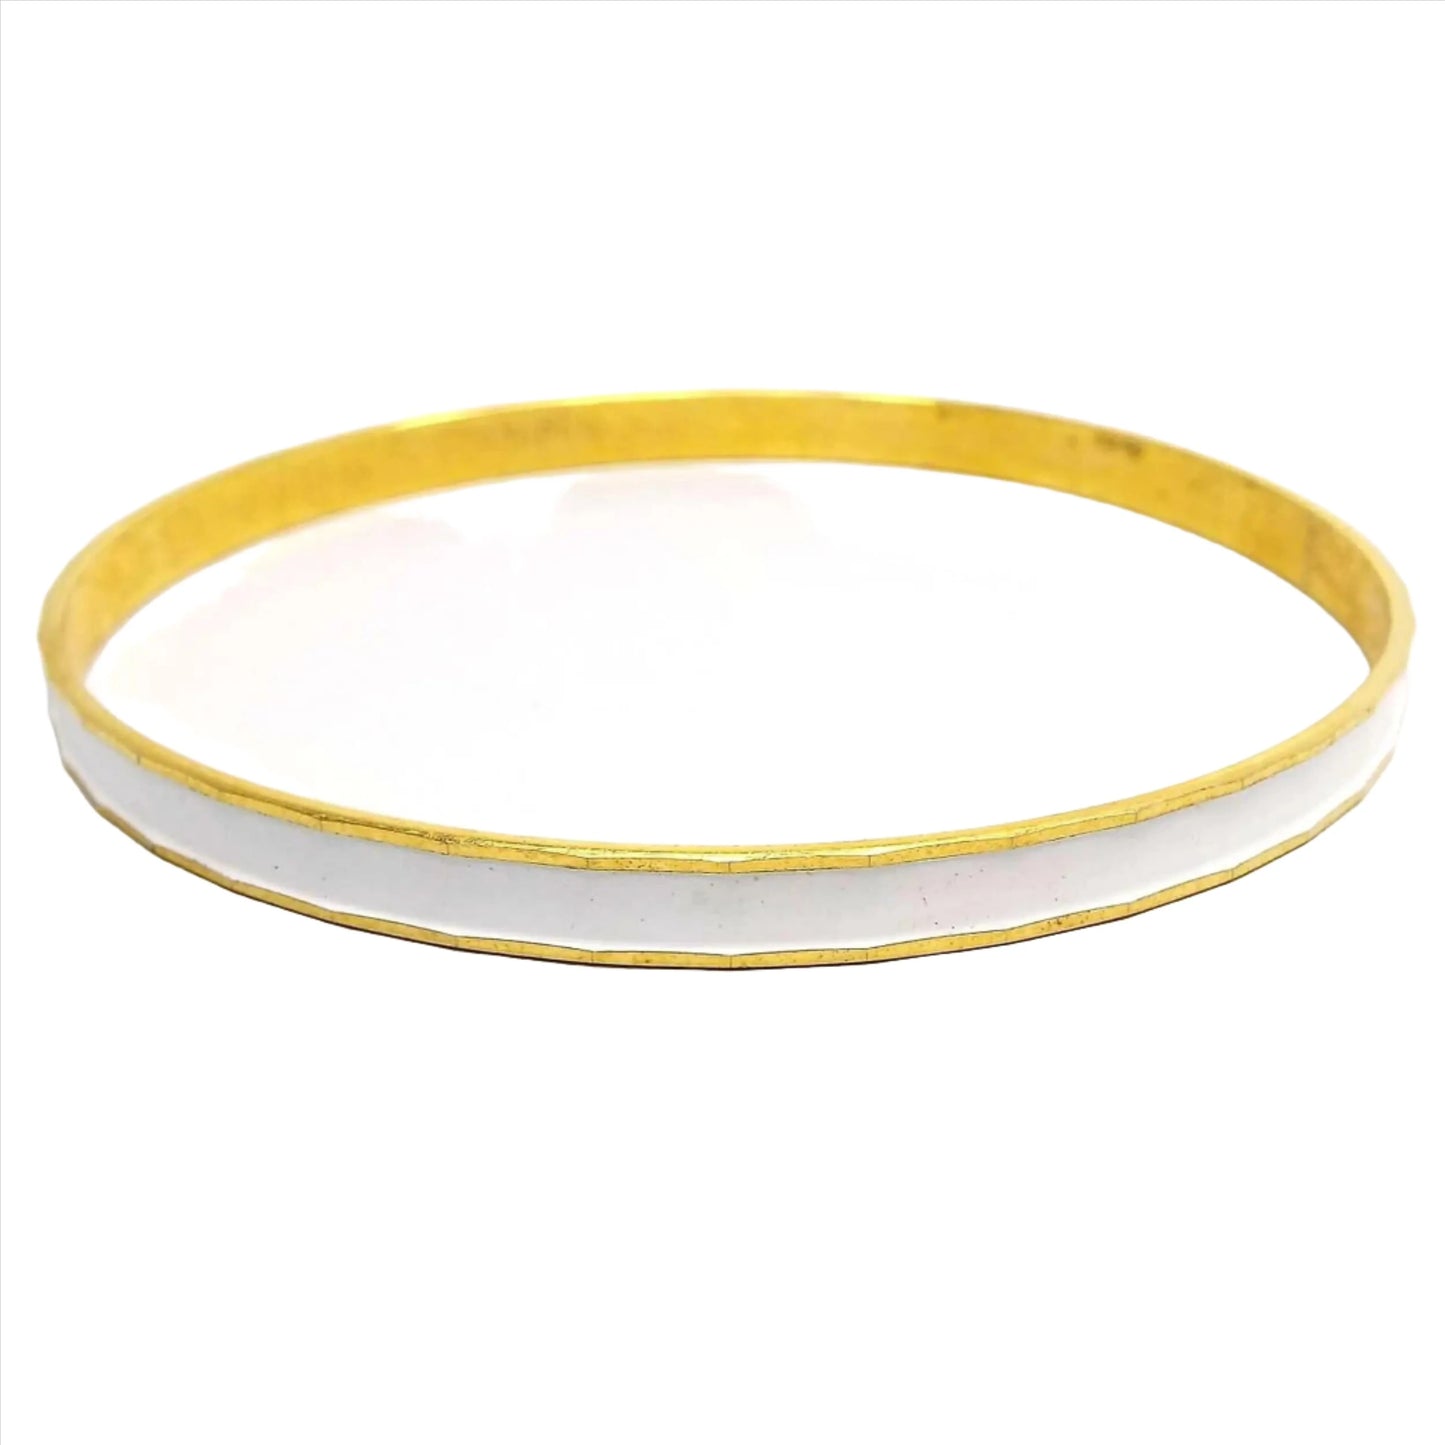 Front view of the Mid Century vintage bangle bracelet from Japan. It is gold tone in color with a faceted edge. The outside edge is enameled white. There are some darkened areas inside the bangle from age.